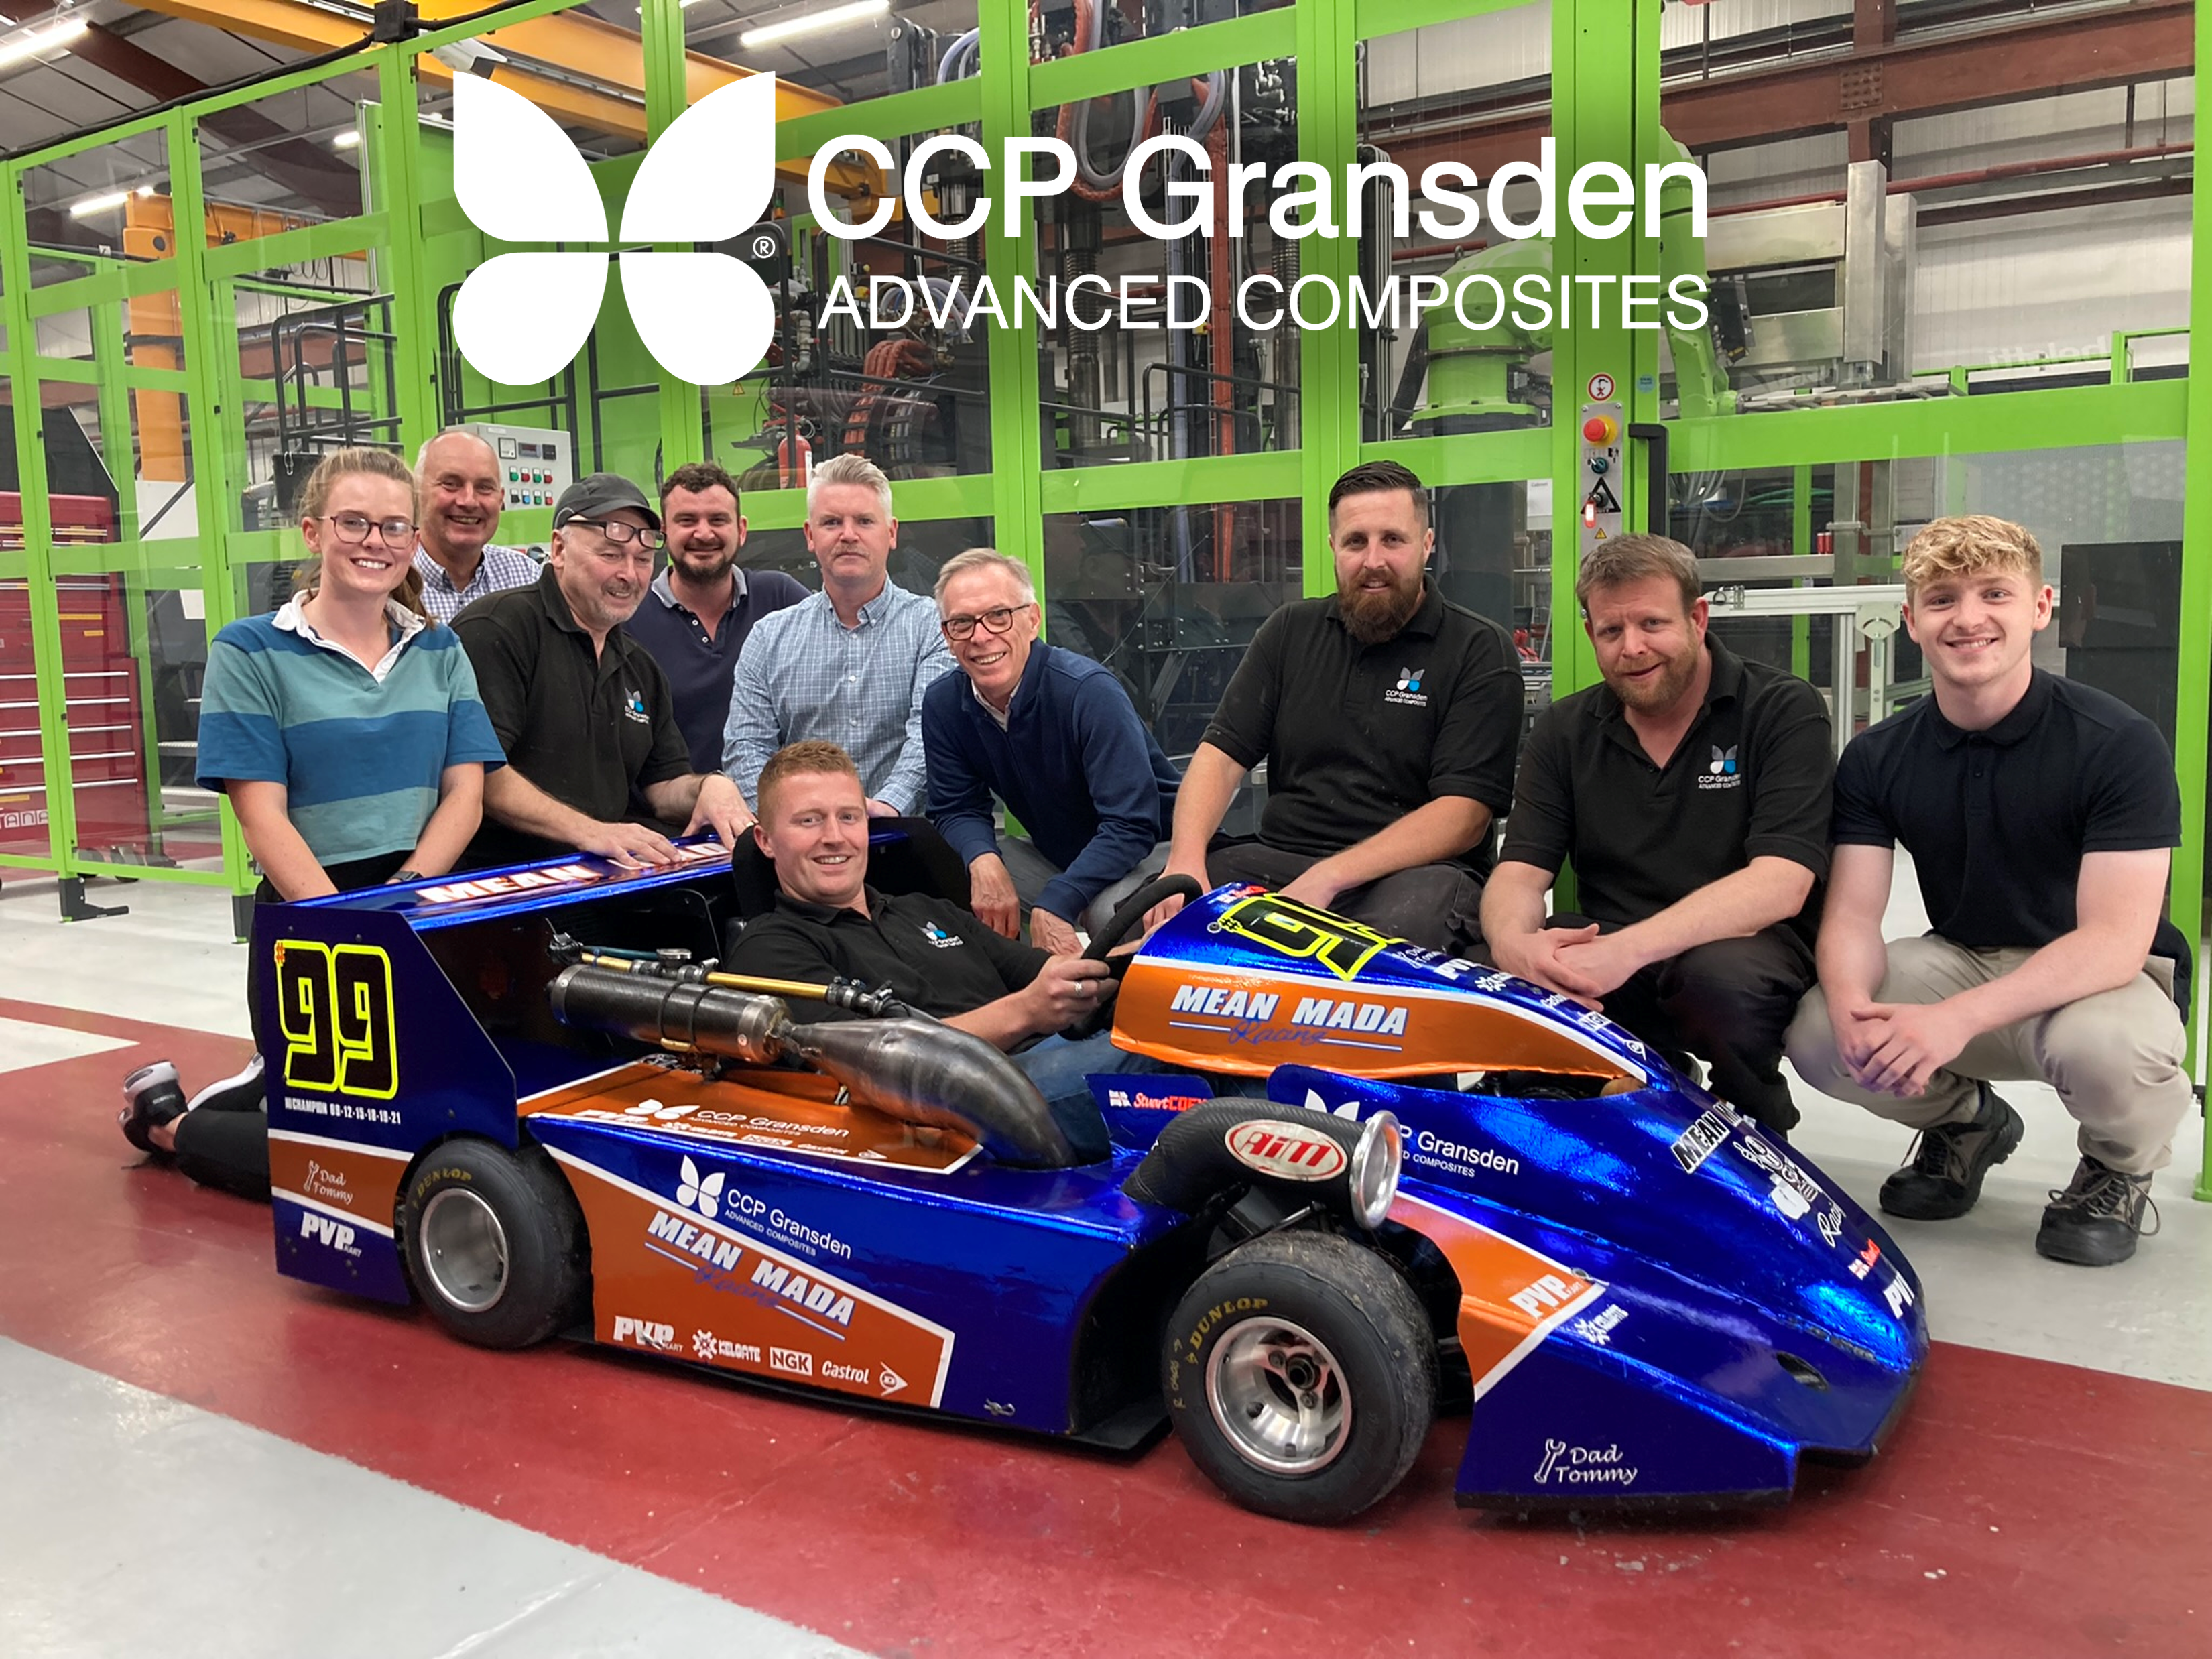 Load video: The video shows camera footage on board Stuart&#39;s go kart as he overtakes competitors on his way to vistory. Other pictures of the CCP Gransden team with the kart are shown too.